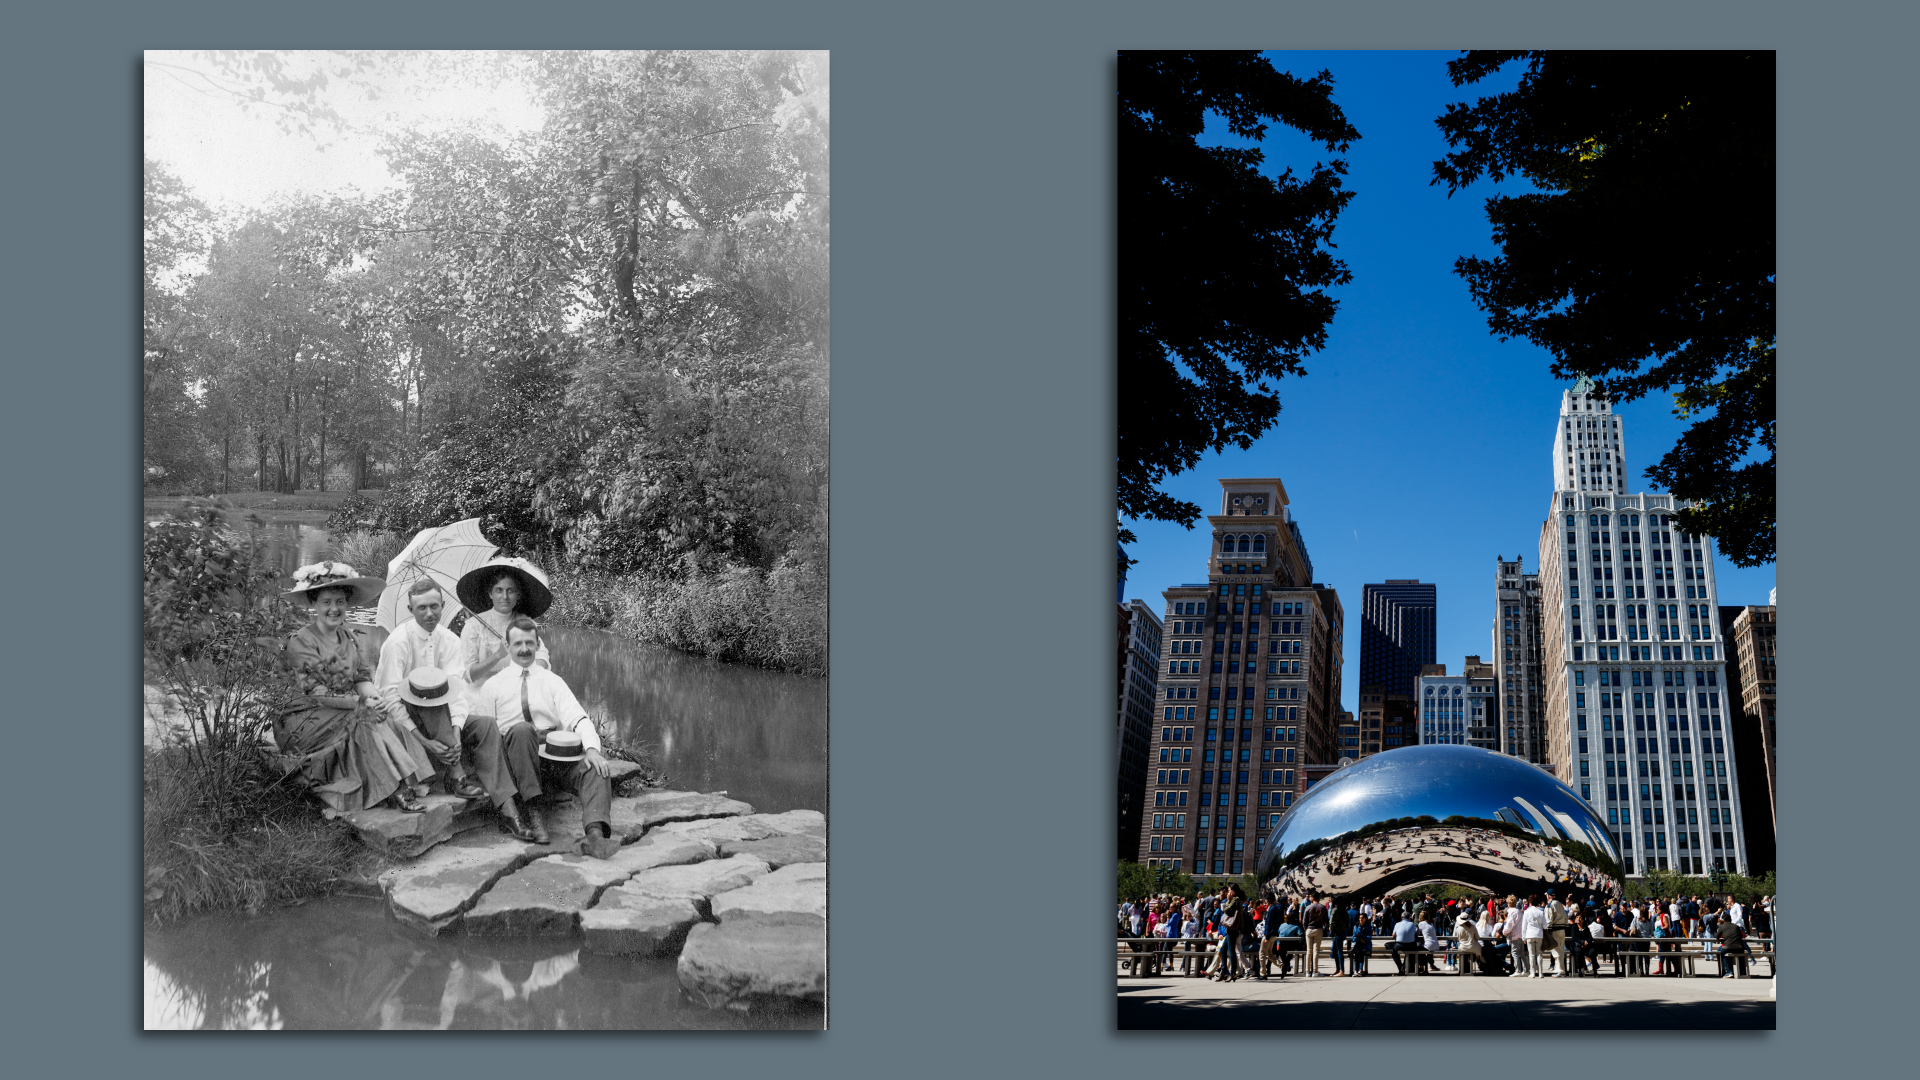 Side-by-side photos. On the left, a black-and-white photo shows two hat-wearing women, one carrying an umbrella, and two men sit on stones by the Humboldt Park lagoon. On the right, a large group of people surrounds the "Cloud Gate" sculpture in Millennium Park.